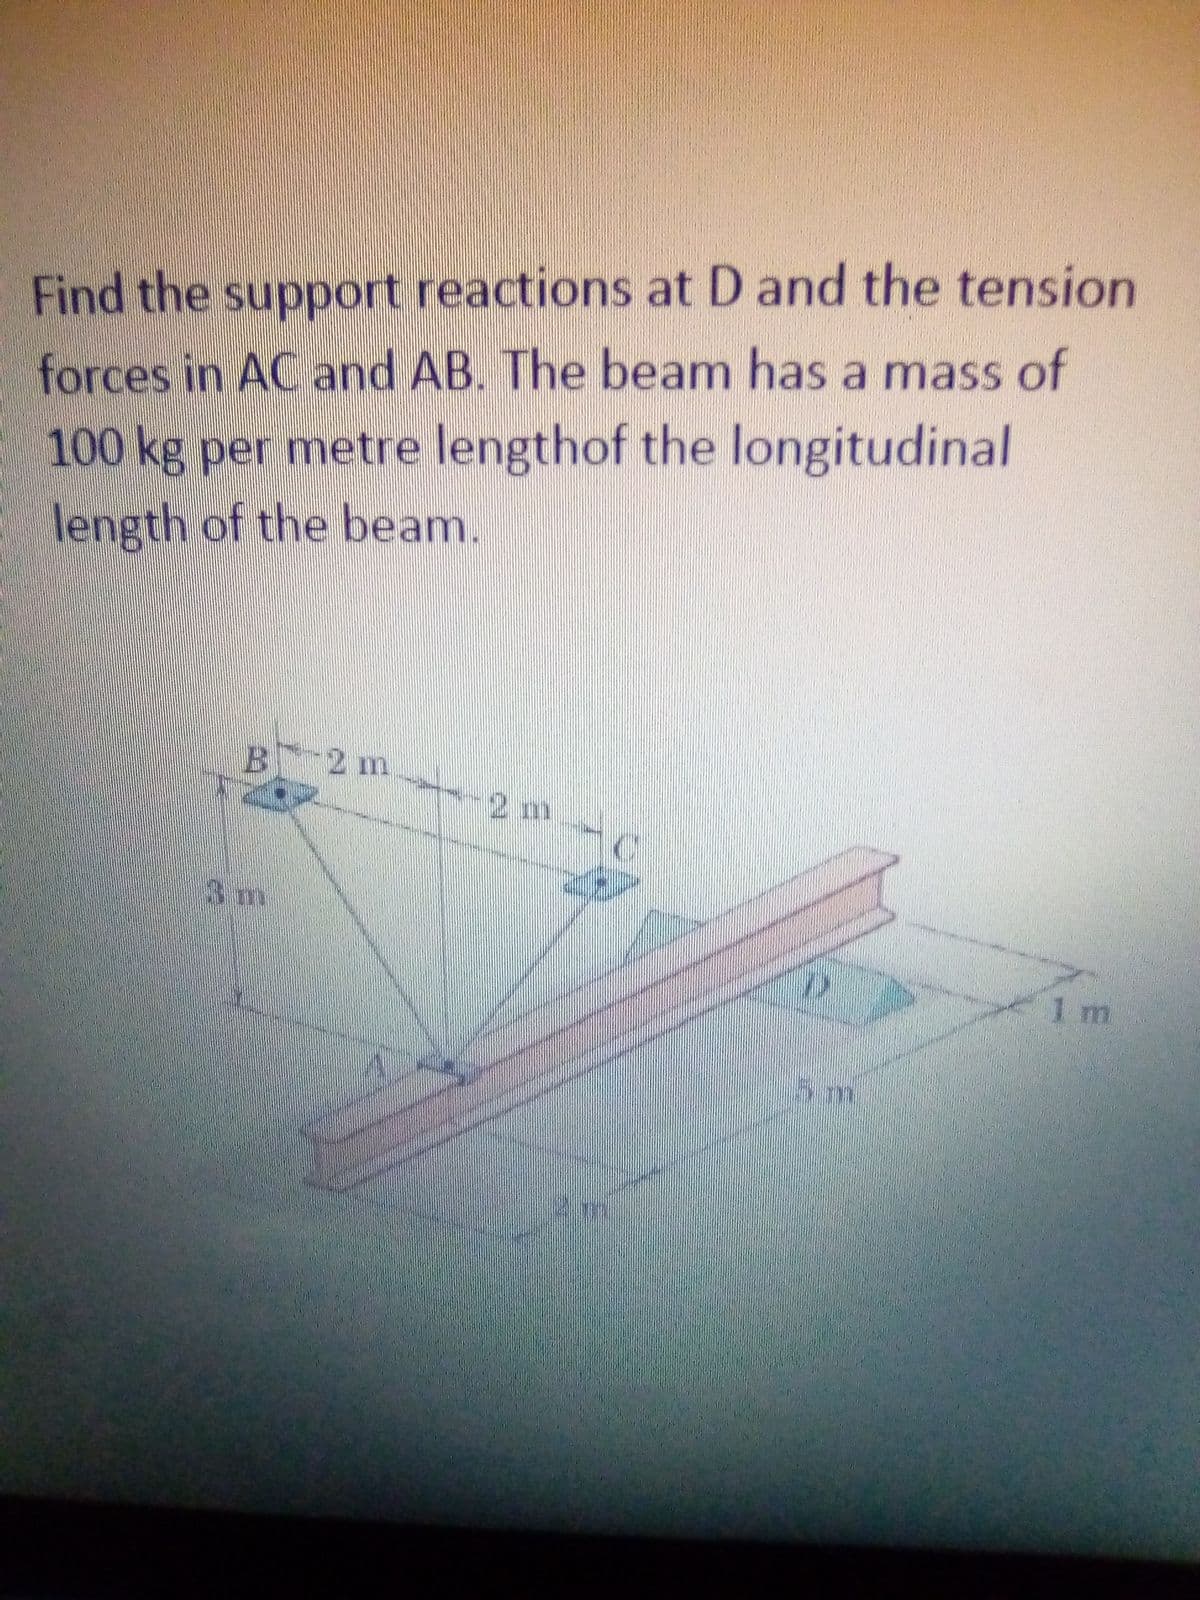 Find the support reactions at D and the tension
forces in AC and AB. The beam has a mass of
100 kg per metre lengthof the longitudinal
length of the beam.
B 2 m
2 m
3m
1 m
5m
